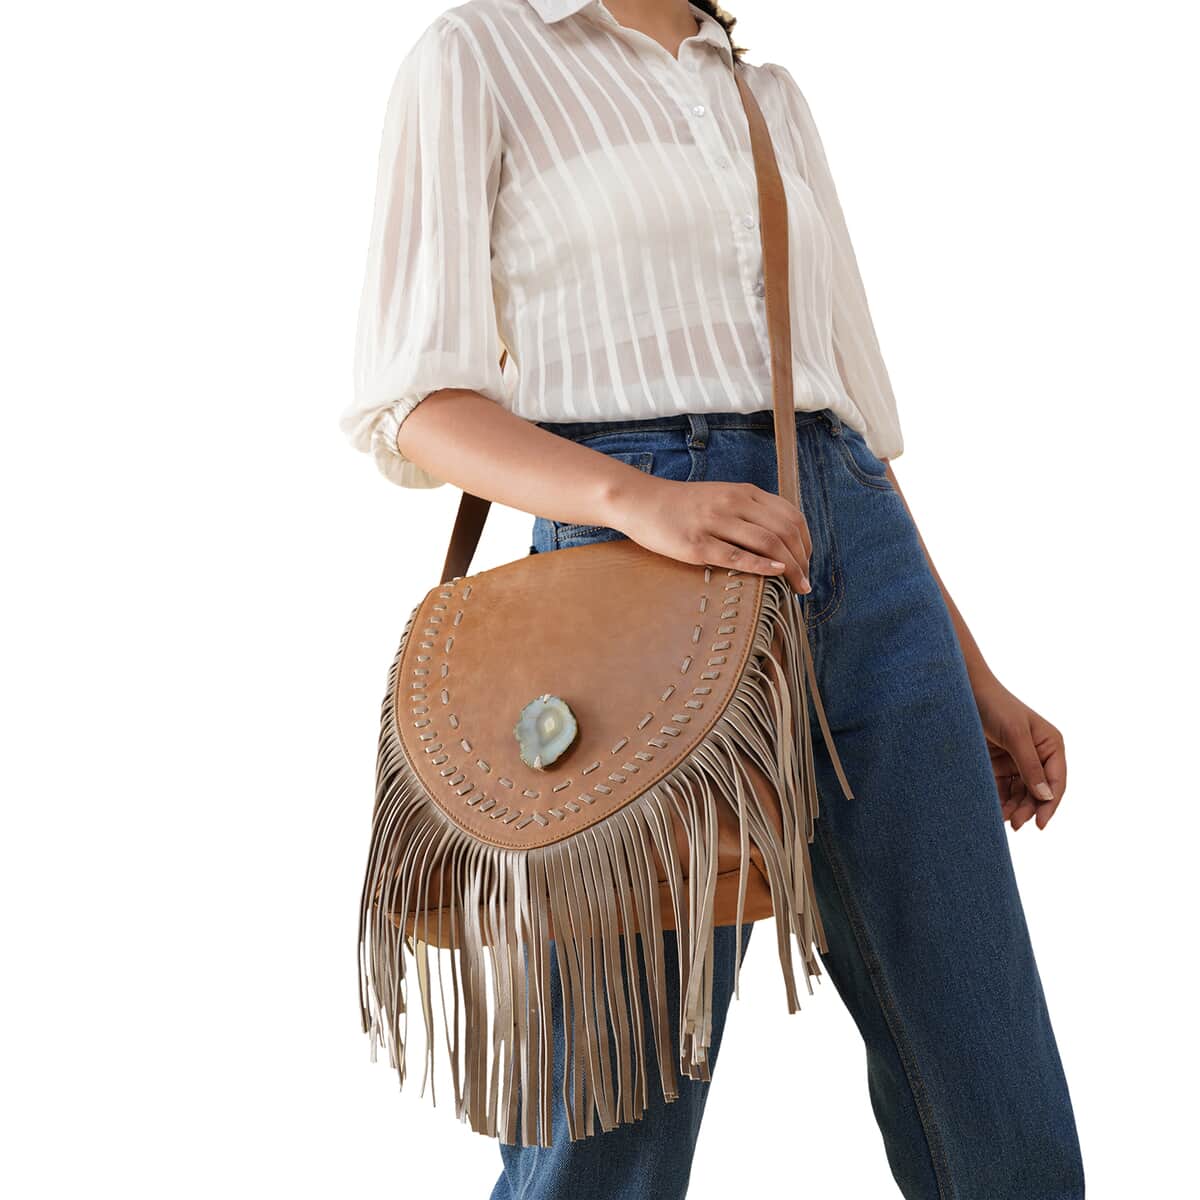 "100% Genuine Leather Crossbody Bag with Agate Stone and Matching Fringes SIZE: 14(L)x3(W)x10.5(H) Inches COLOR: Gray" image number 1